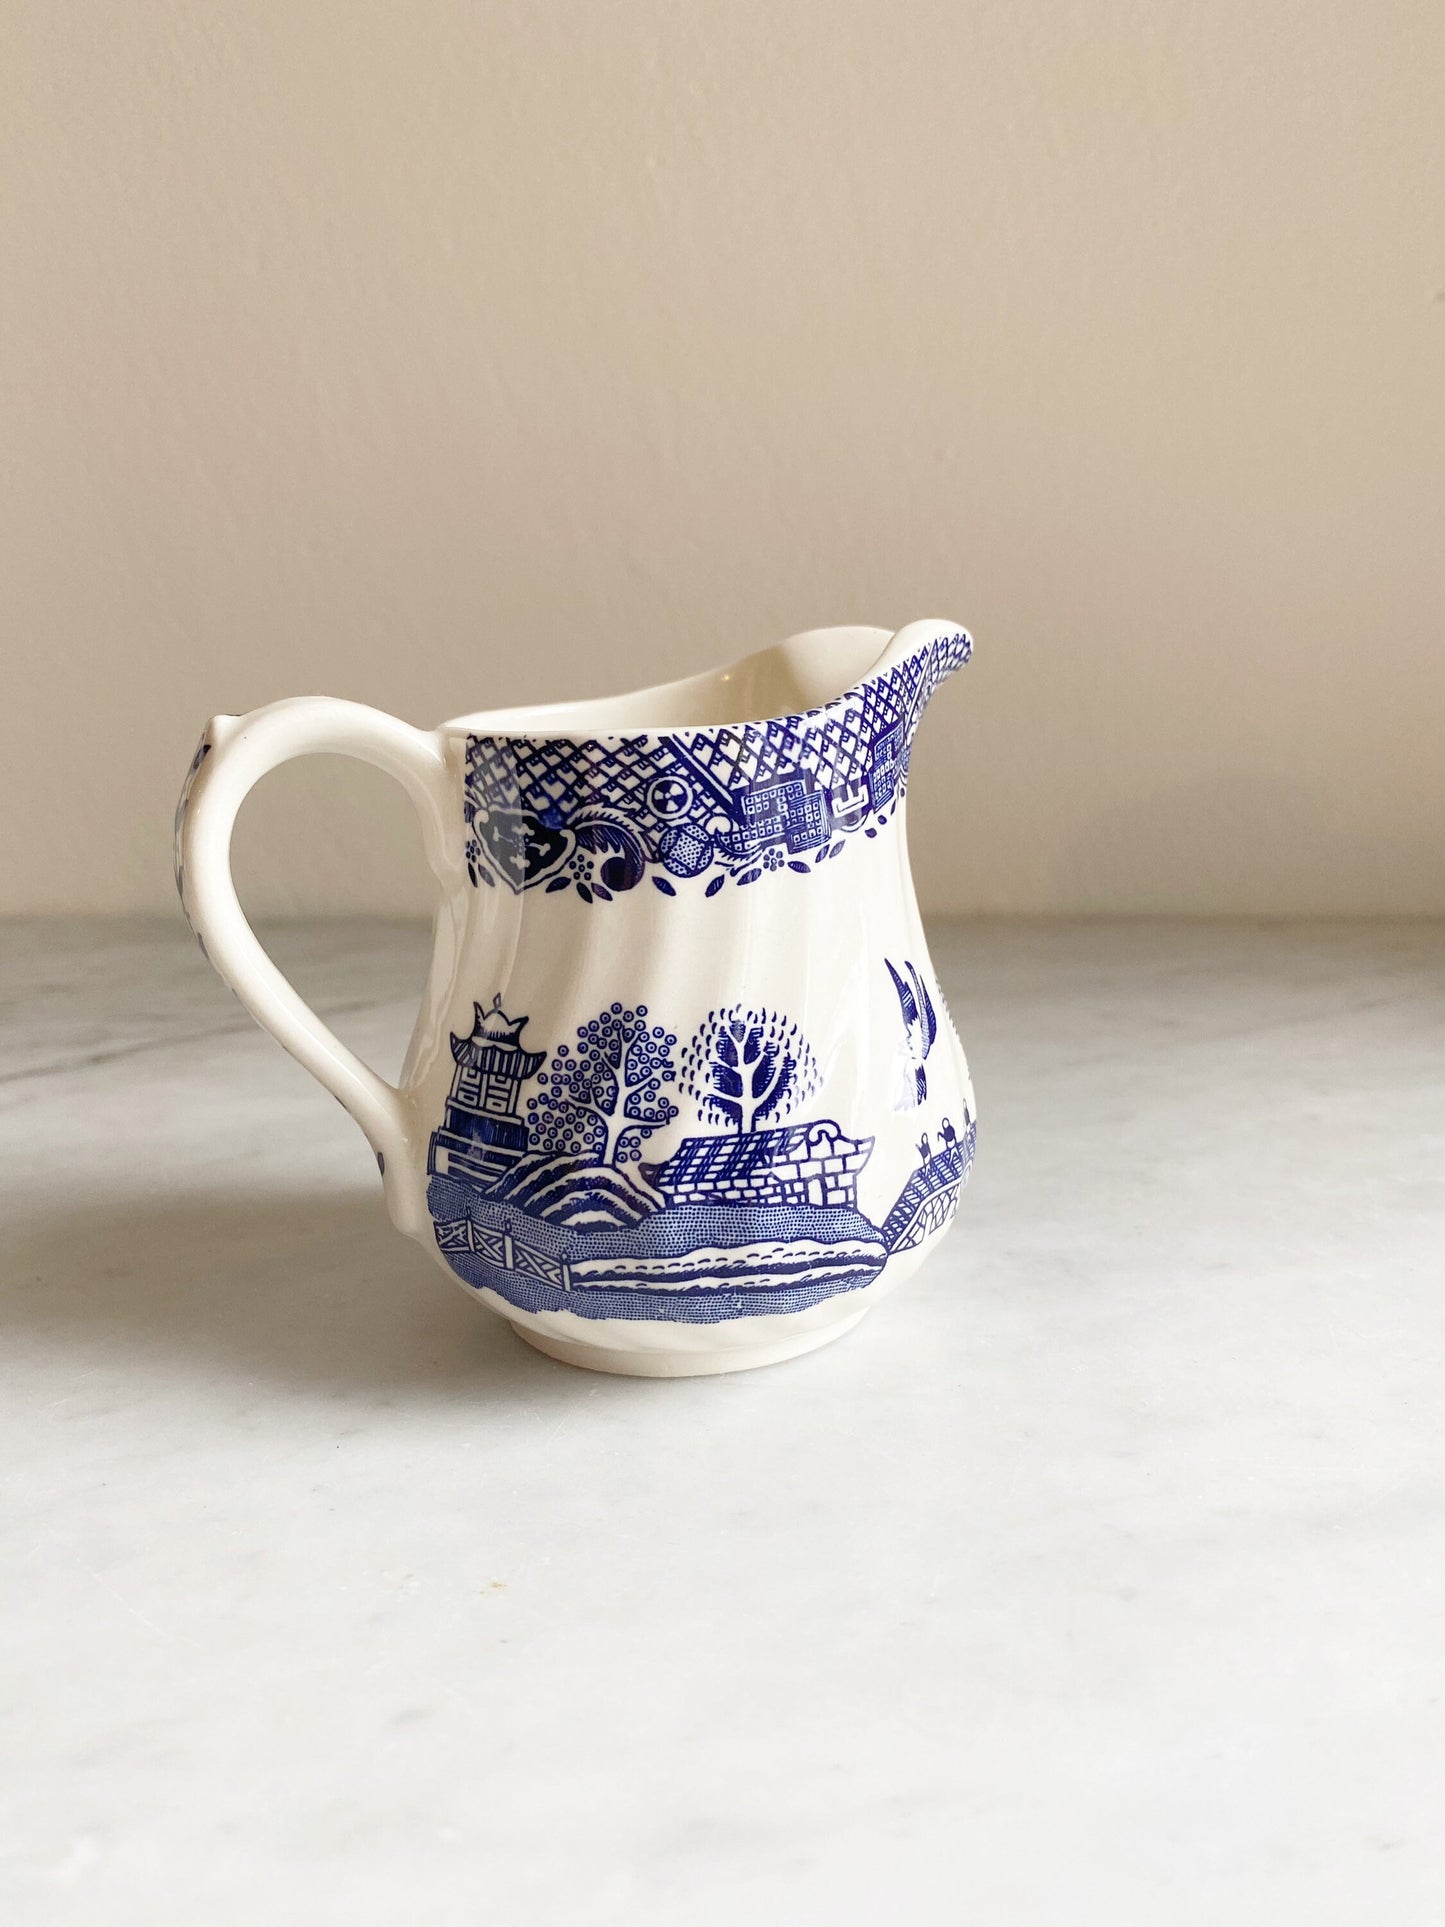 Barratts of Staffordshire Willow 6oz Small Creamer, Blue Transferware, Staffordshire china, Made in England